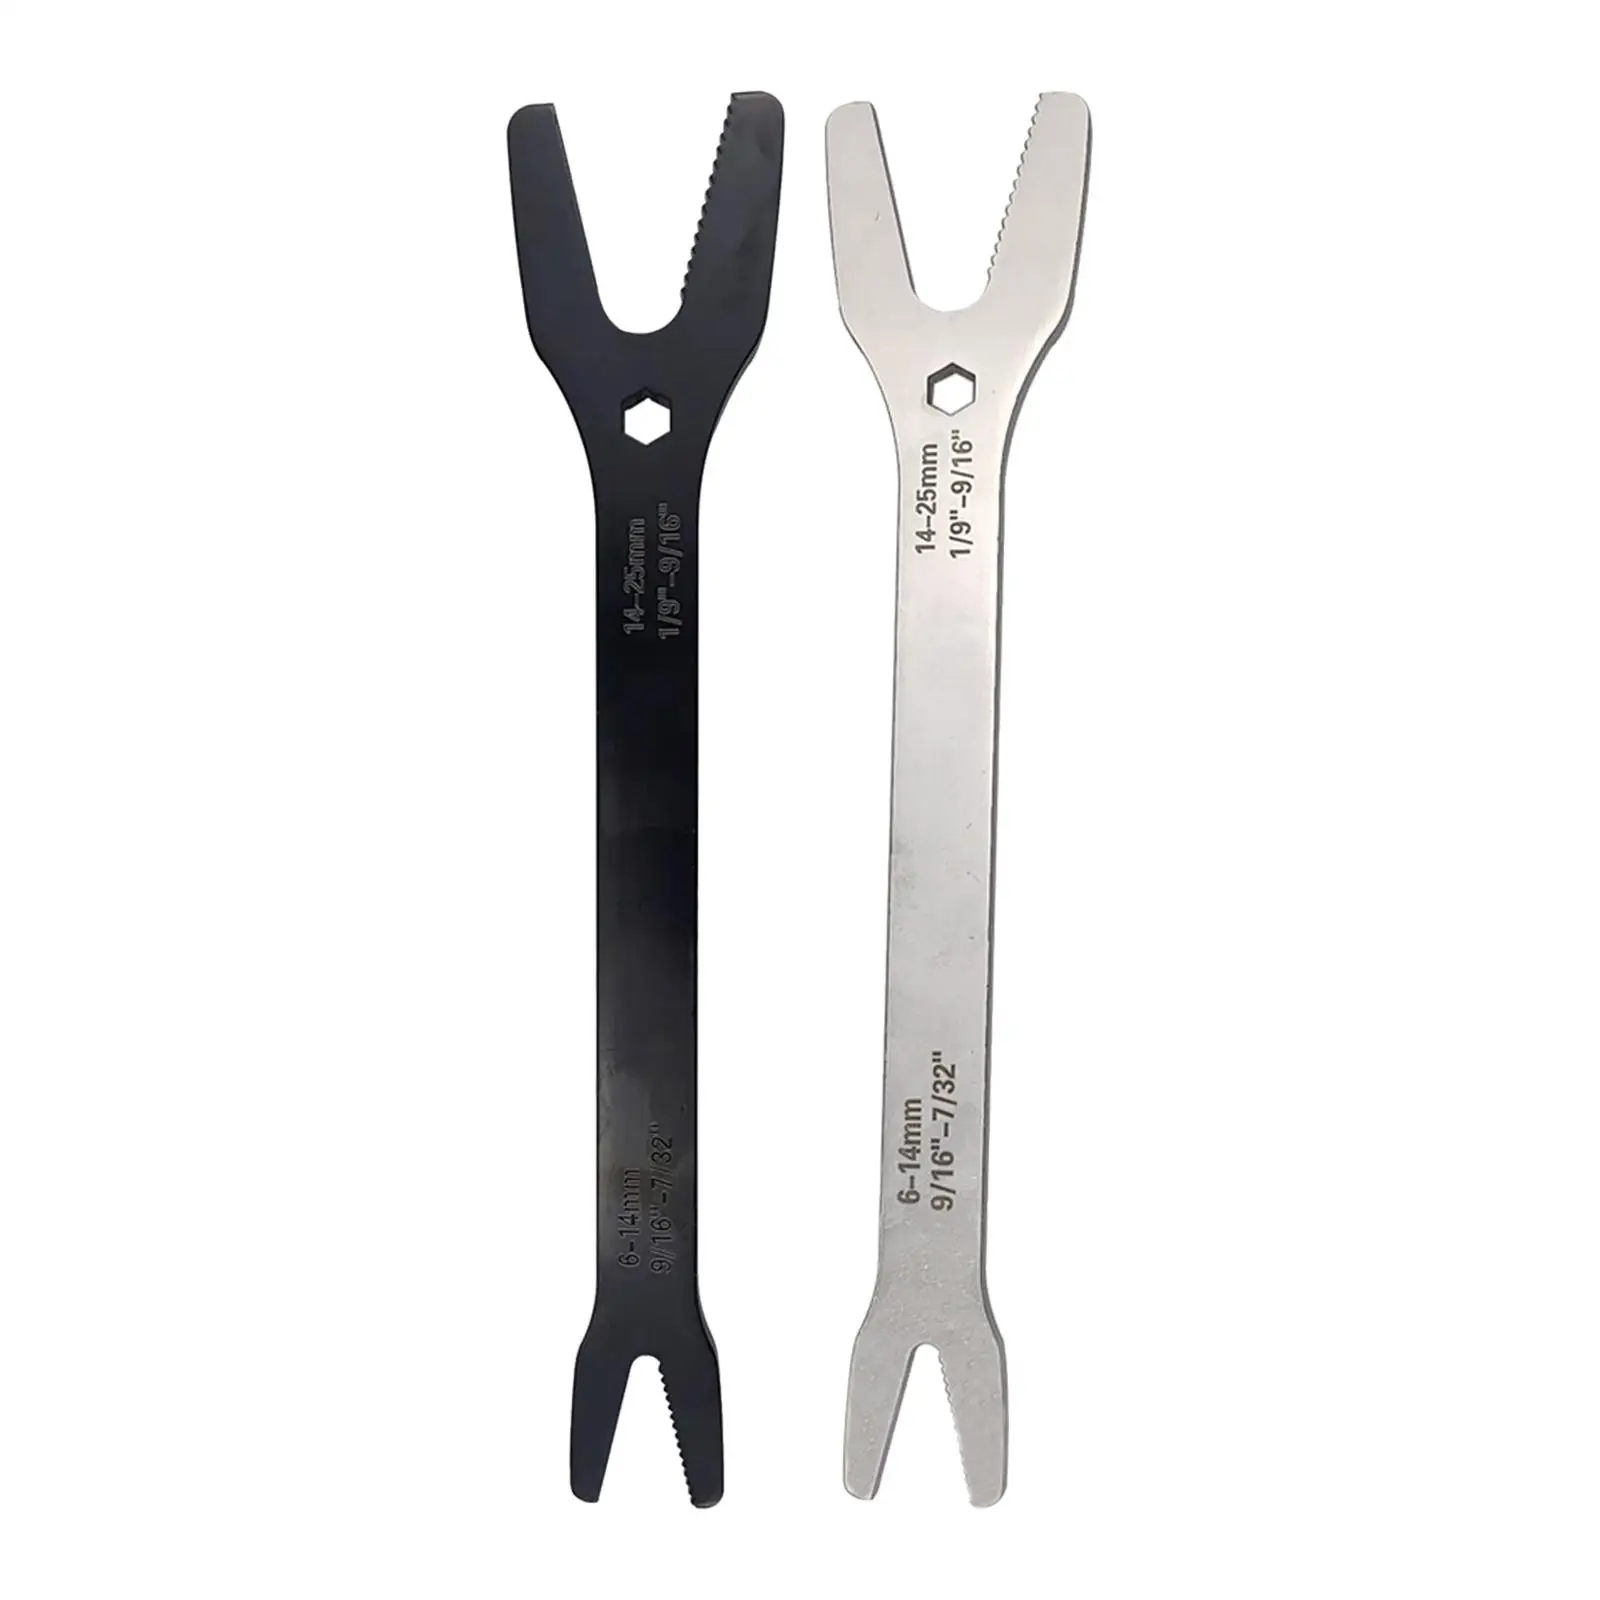 Universal Wrench Self Tightening Household 6-25mm Double Head Wrench for Home Construction Maintenance Tool Repairing